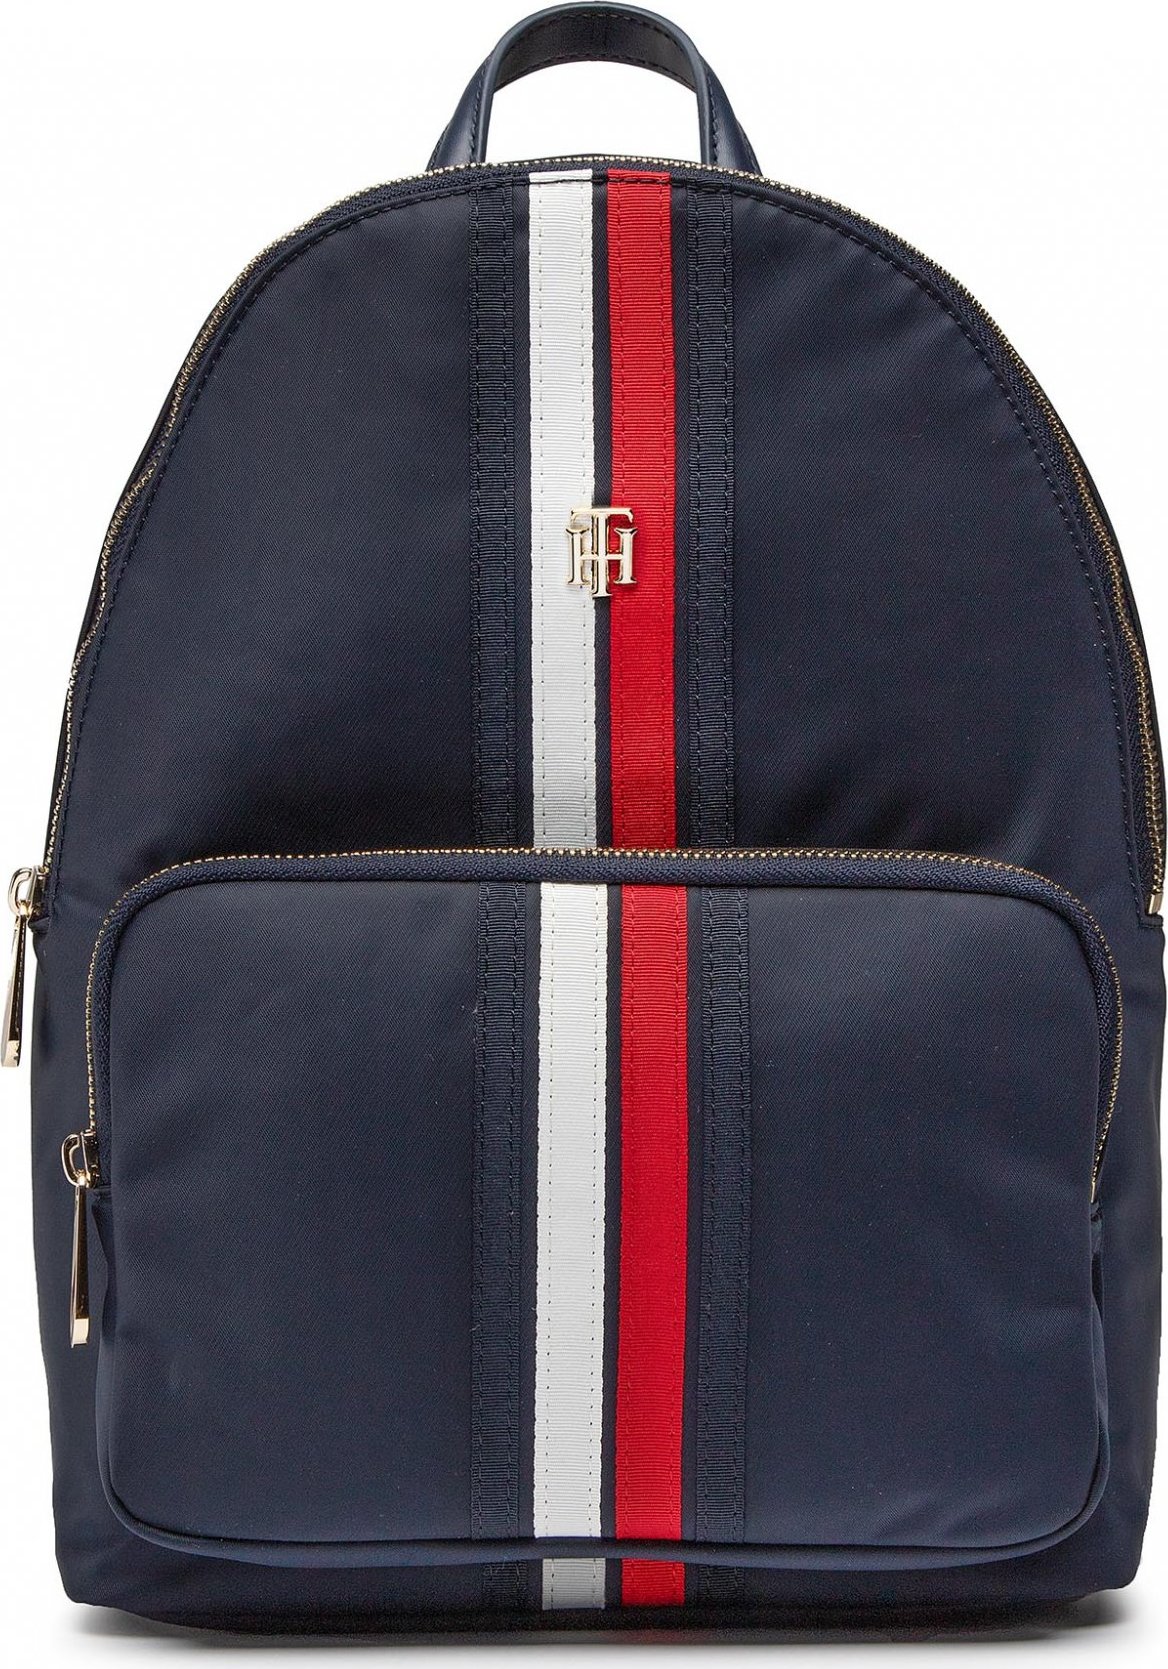 TOMMY HILFIGER Poppy Backpack AW0AW13170